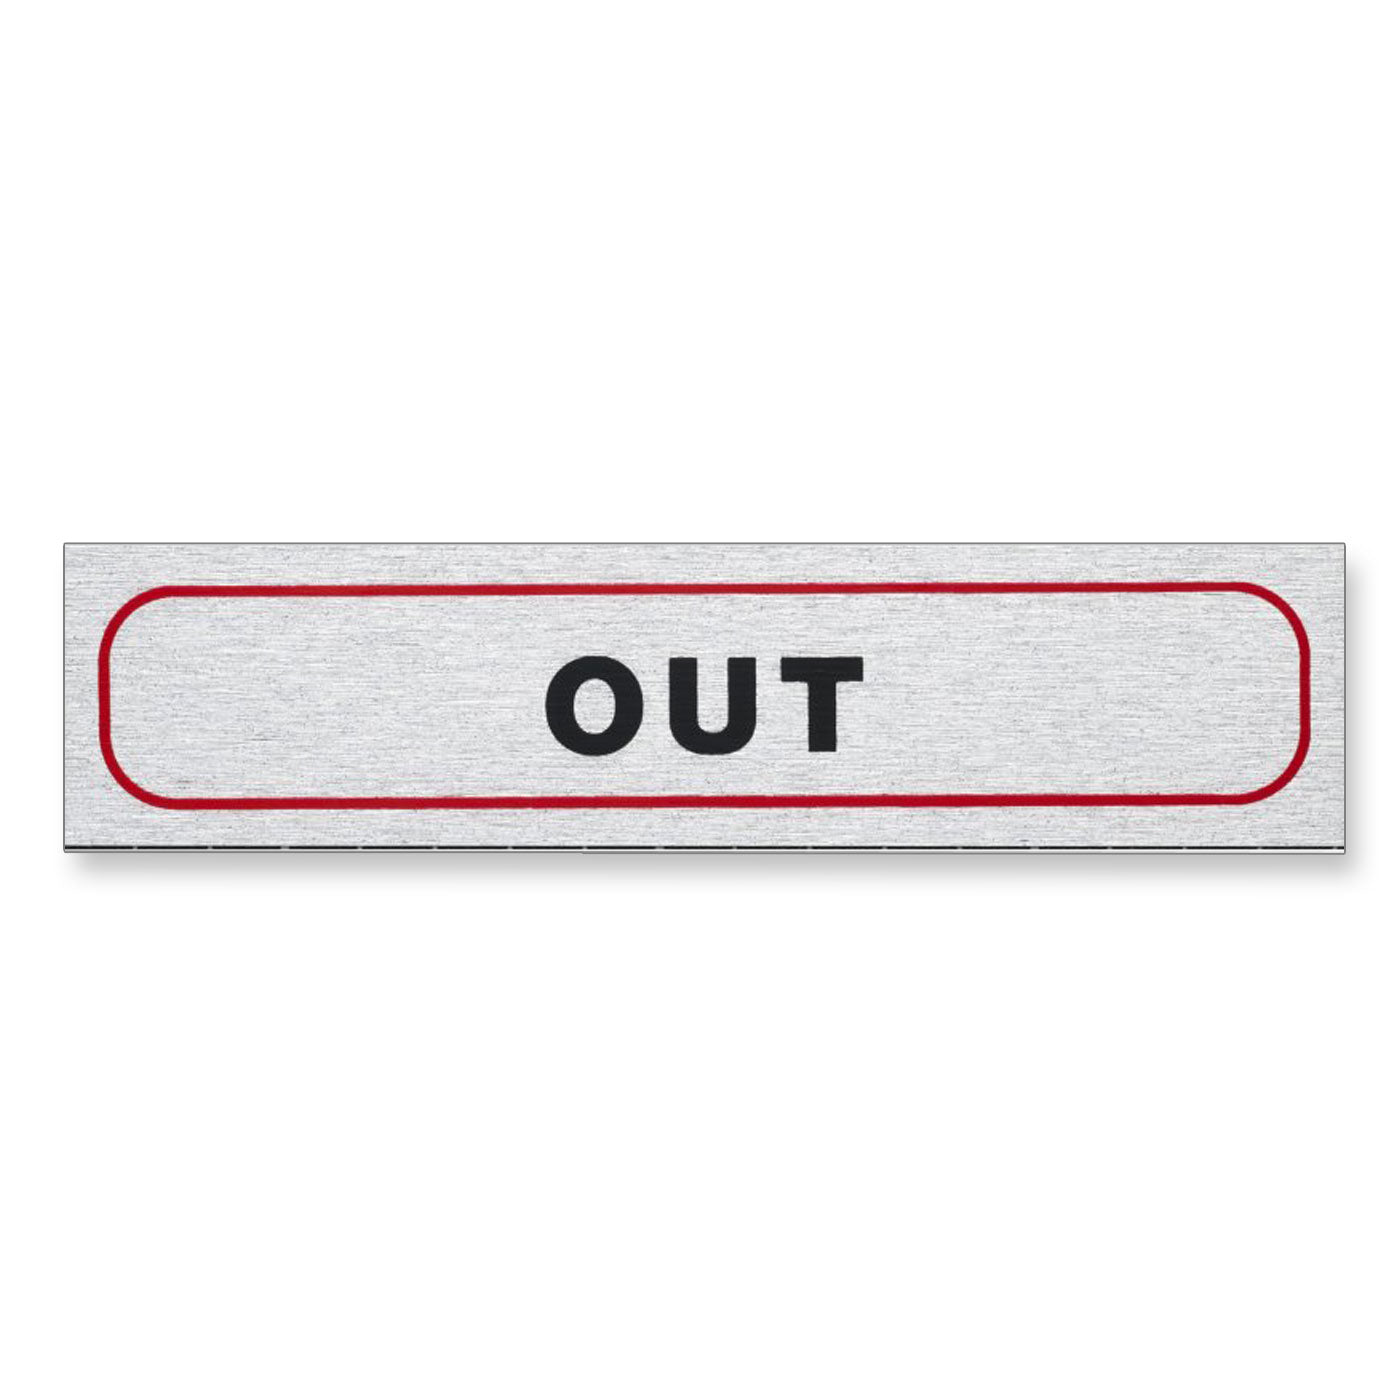 Information Sign "OUT" 17 x 4 cm [Self-Adhesive]